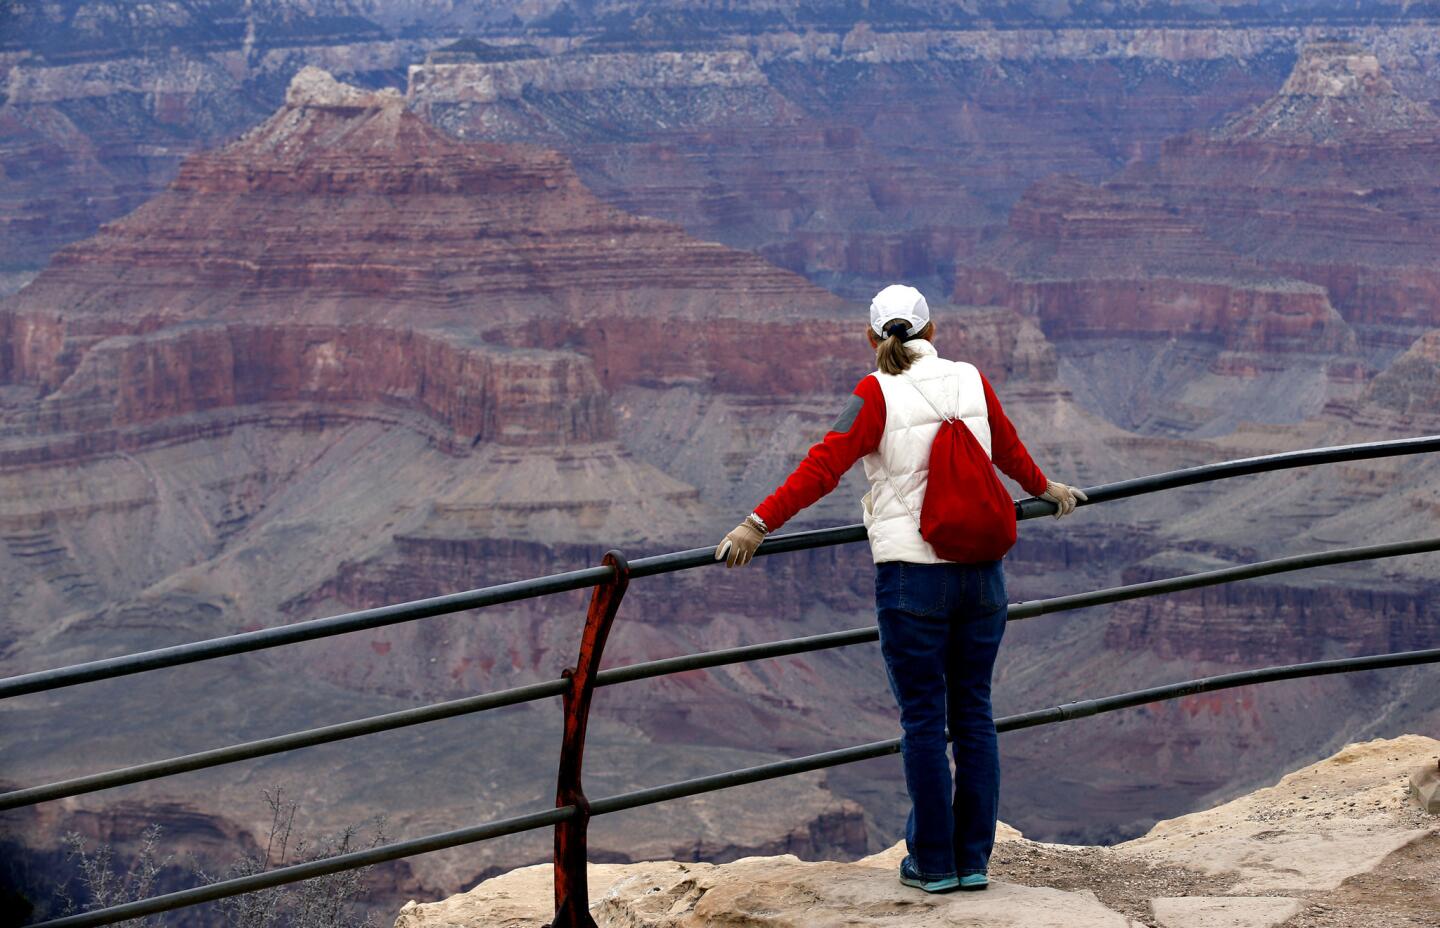 Visitors at Mojave Point have a 180-degree view of the Grand Canyon.